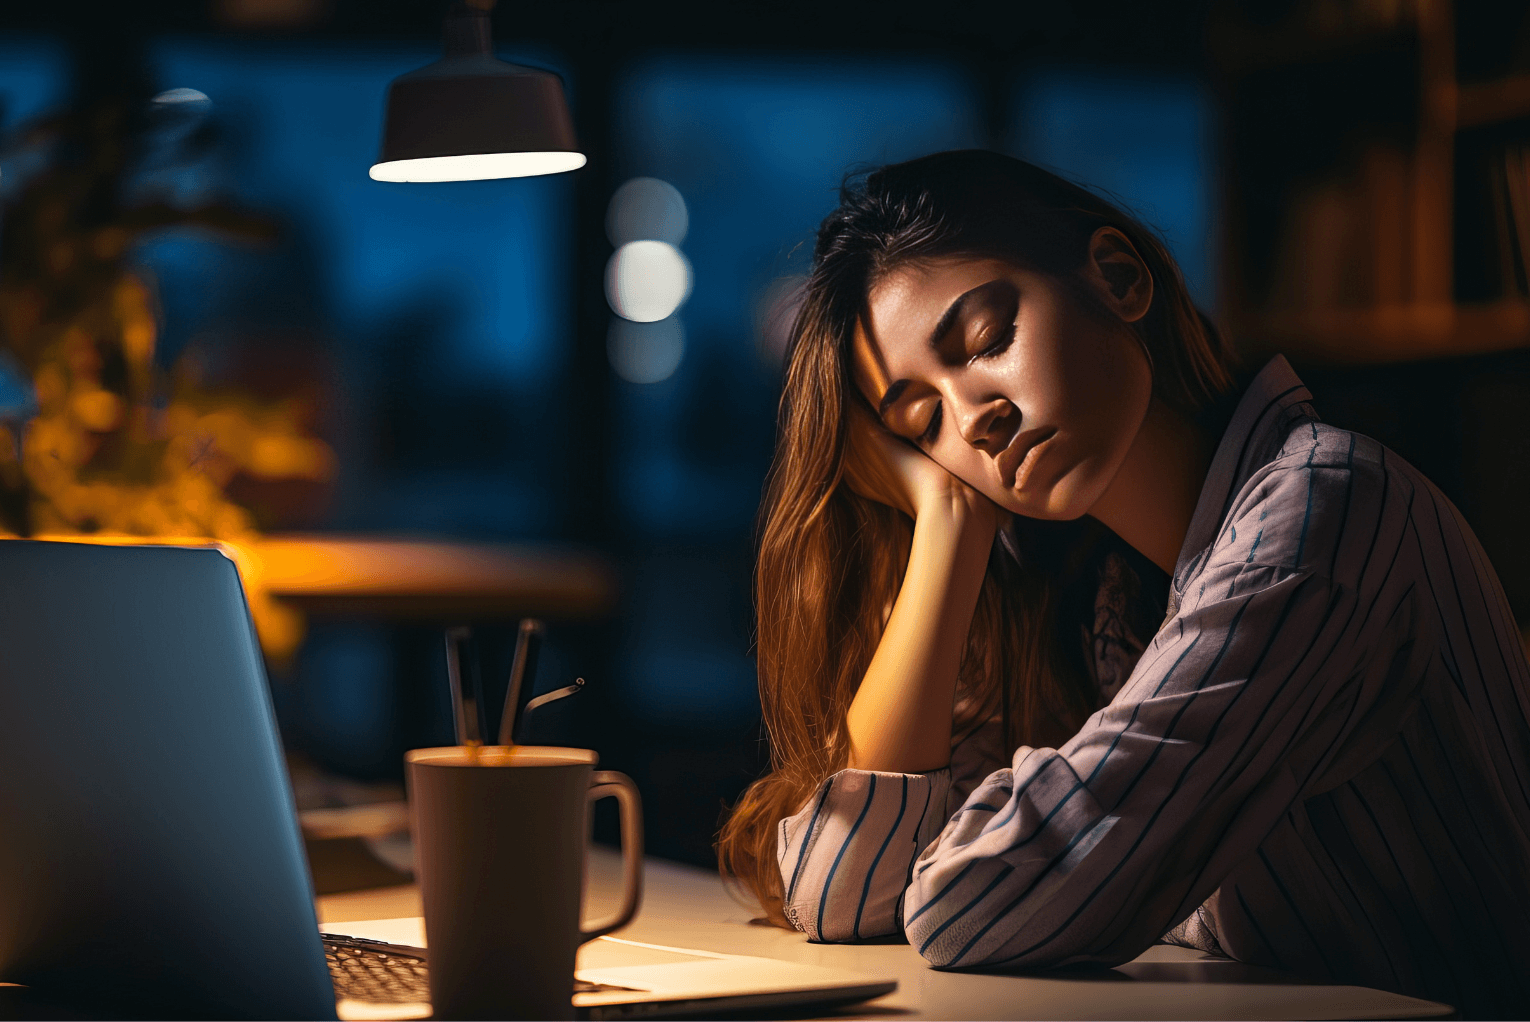 Feeling Unusually Exhausted? Here’s What You Need to Know